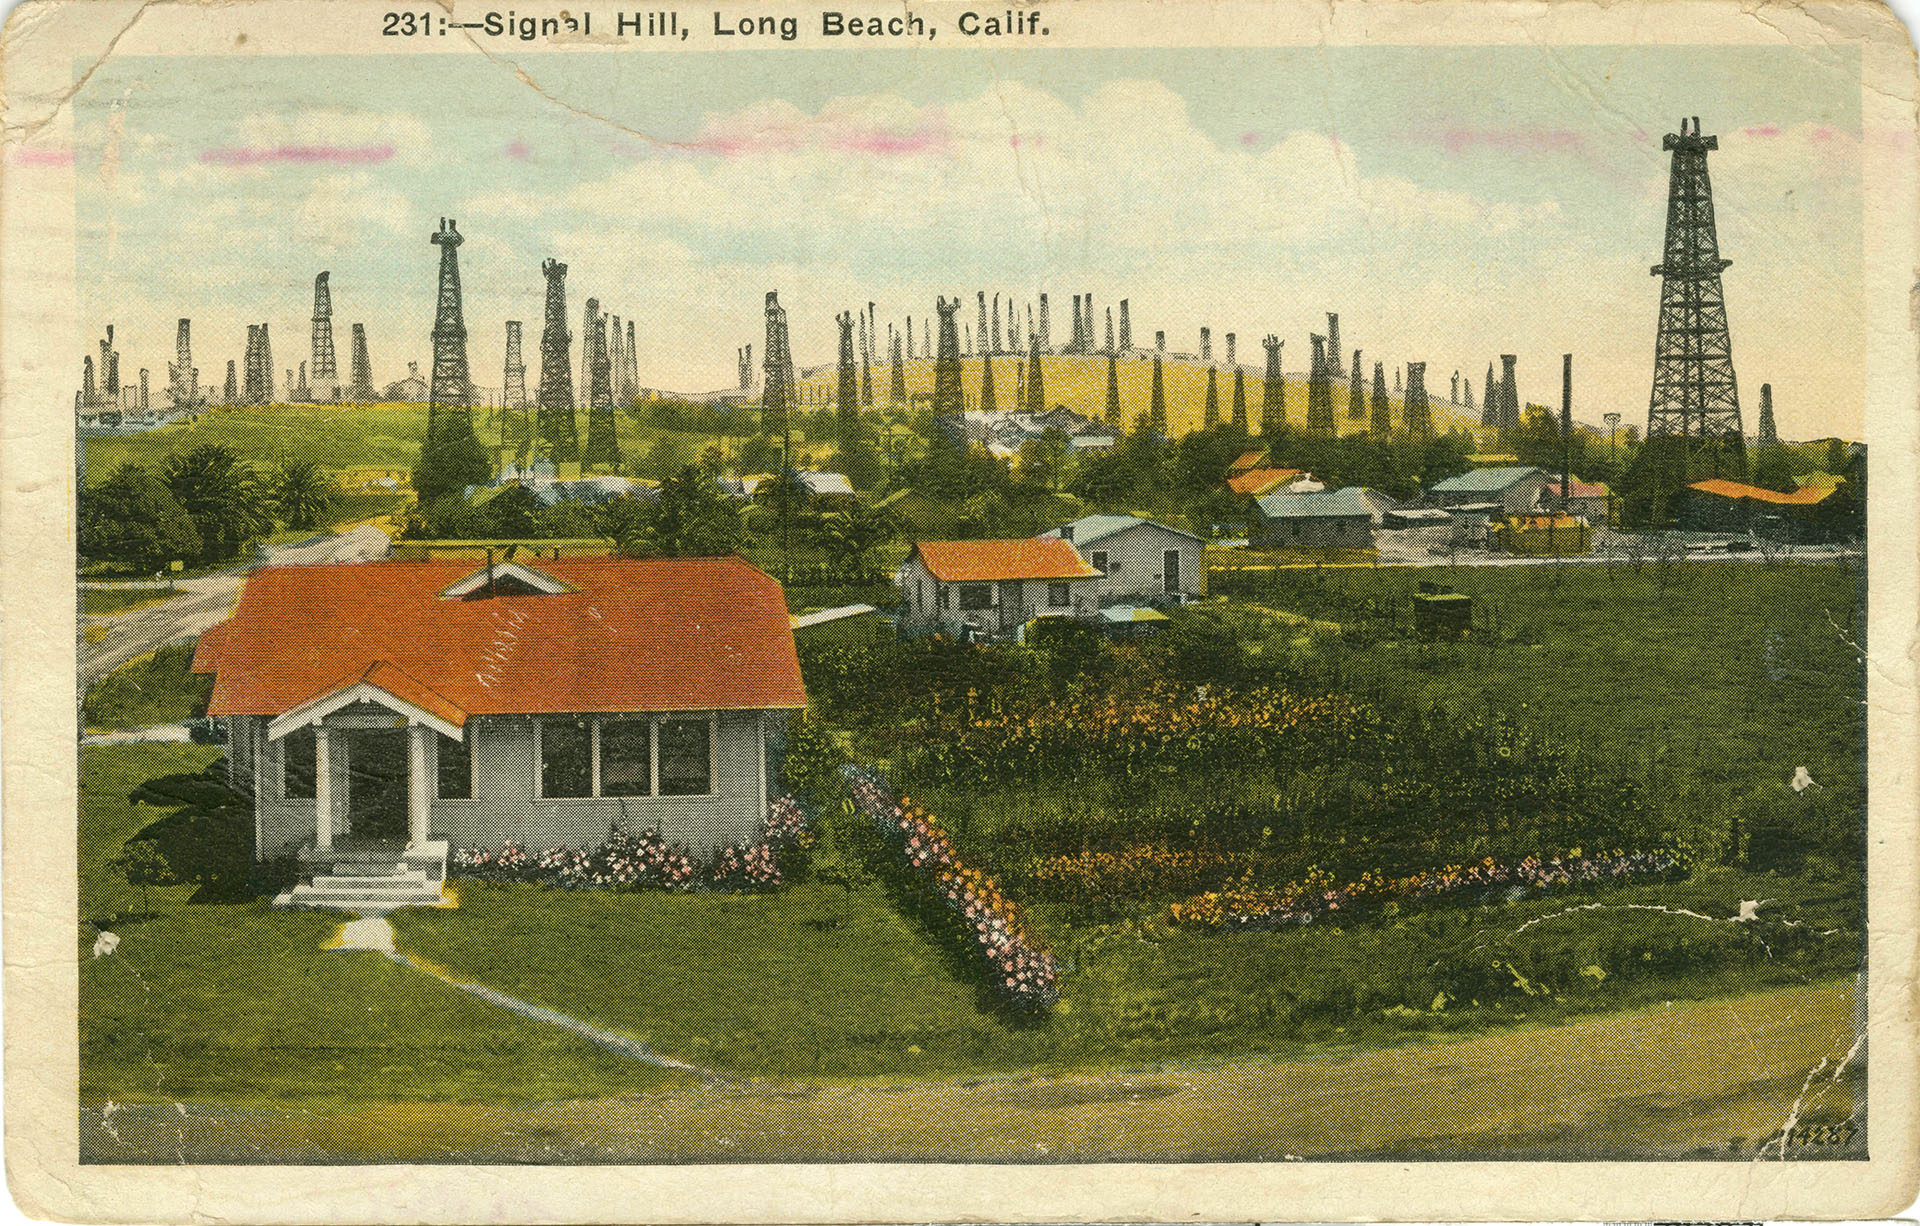 Oil fueled the growth of LA from 50,000 people in 1980 to 1.5 million in 1940. By the 1940s, the Signal Hill field alone had a forest of 20,000 derricks among its residential homes. LA county still has 3,000 active wells. Signal Hill postcard c. 1926, courtesy of the Loyola Marymount University library archive